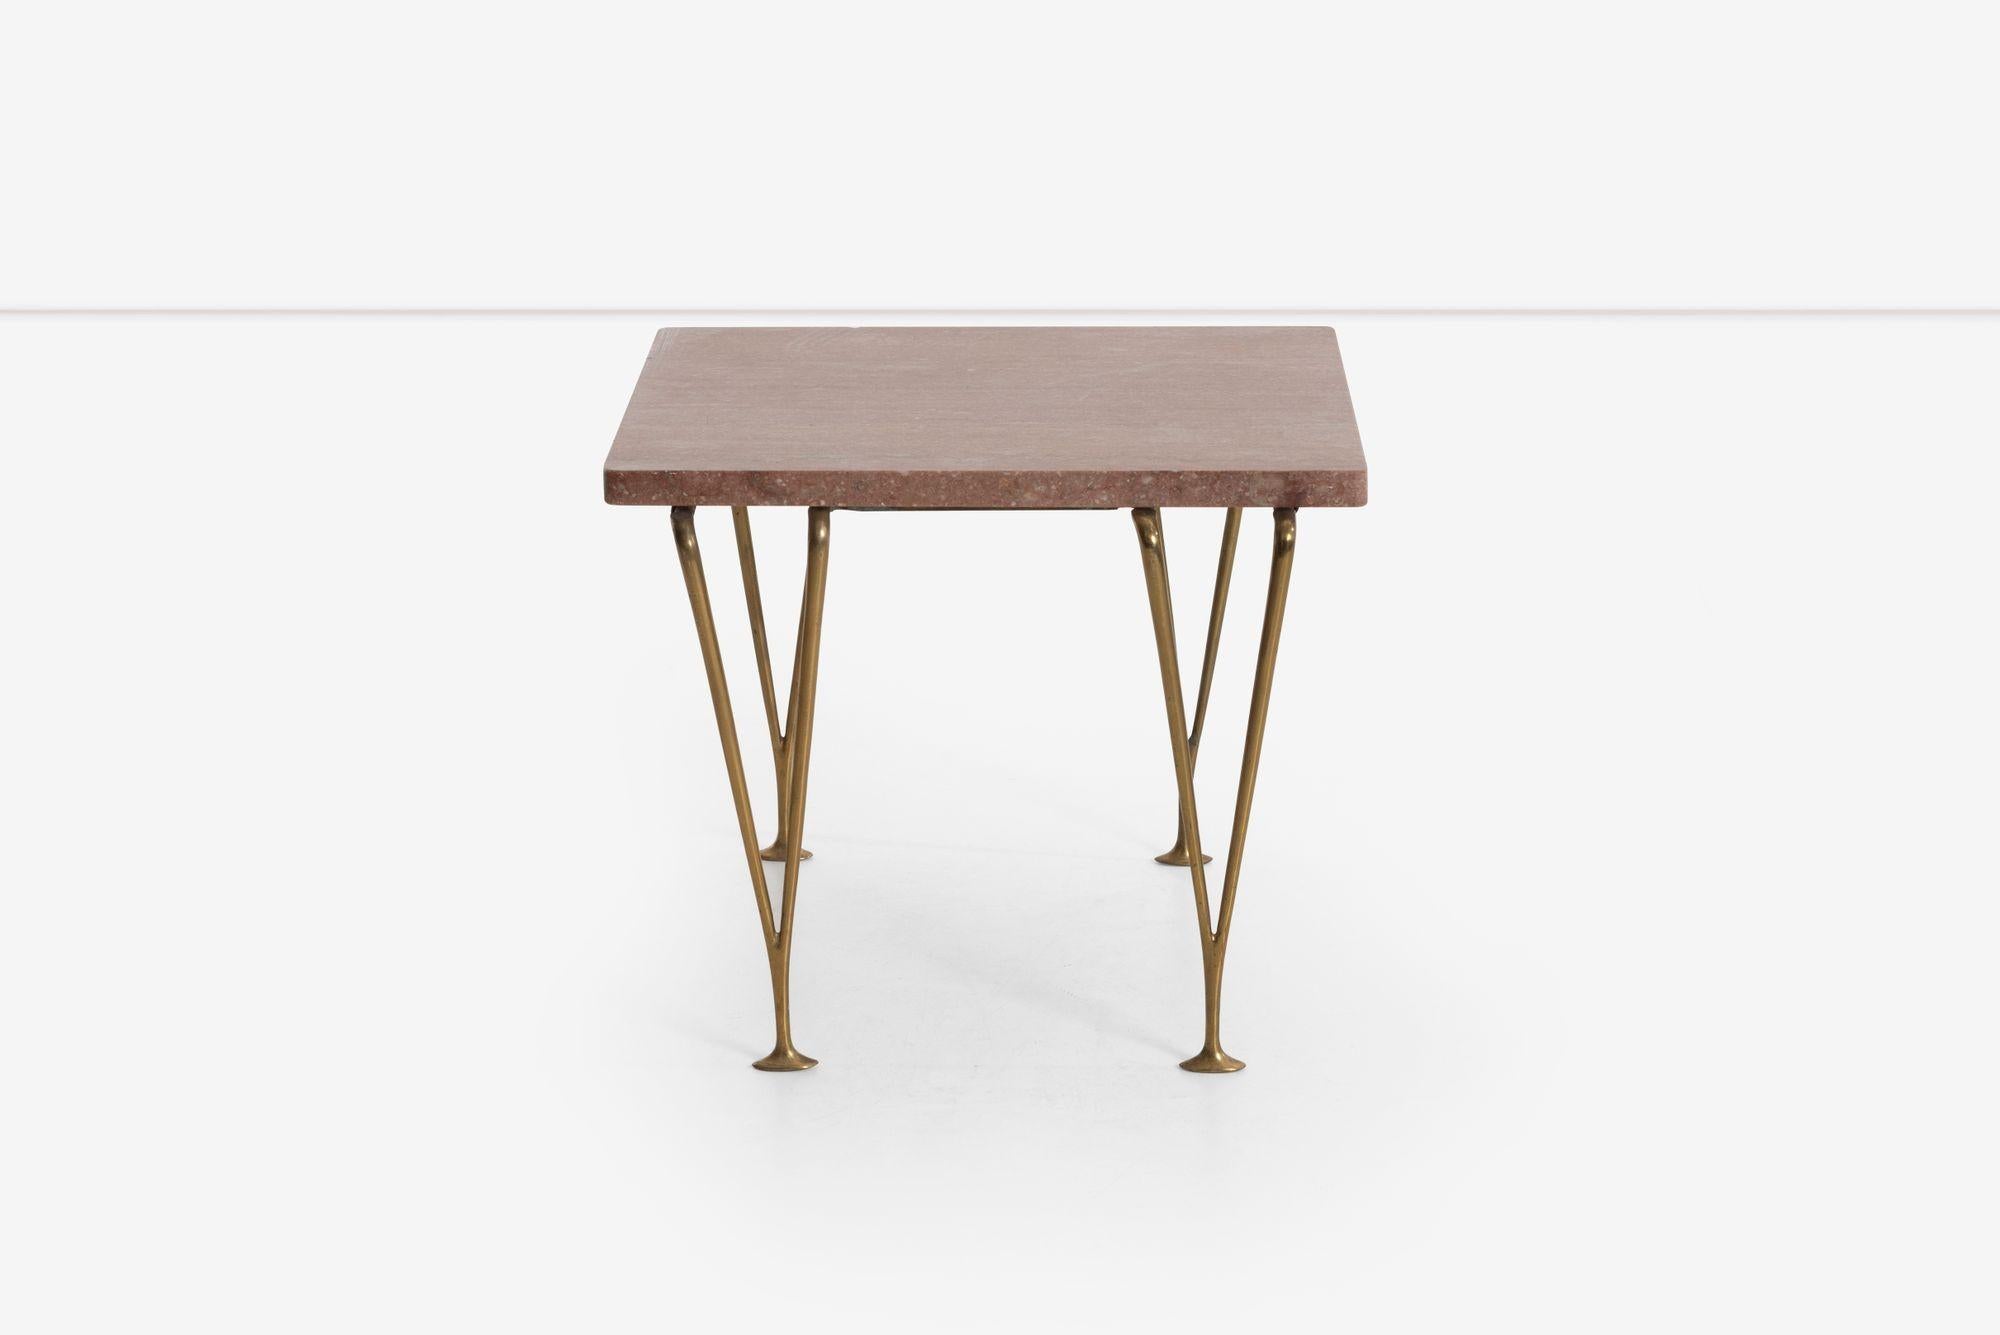 Hugh Acton unique side table, from the residence of Hugh Acton, Birmingham, Michigan.
Similar to the iconic production benches, V legs in solid brass with a pink travertine top.